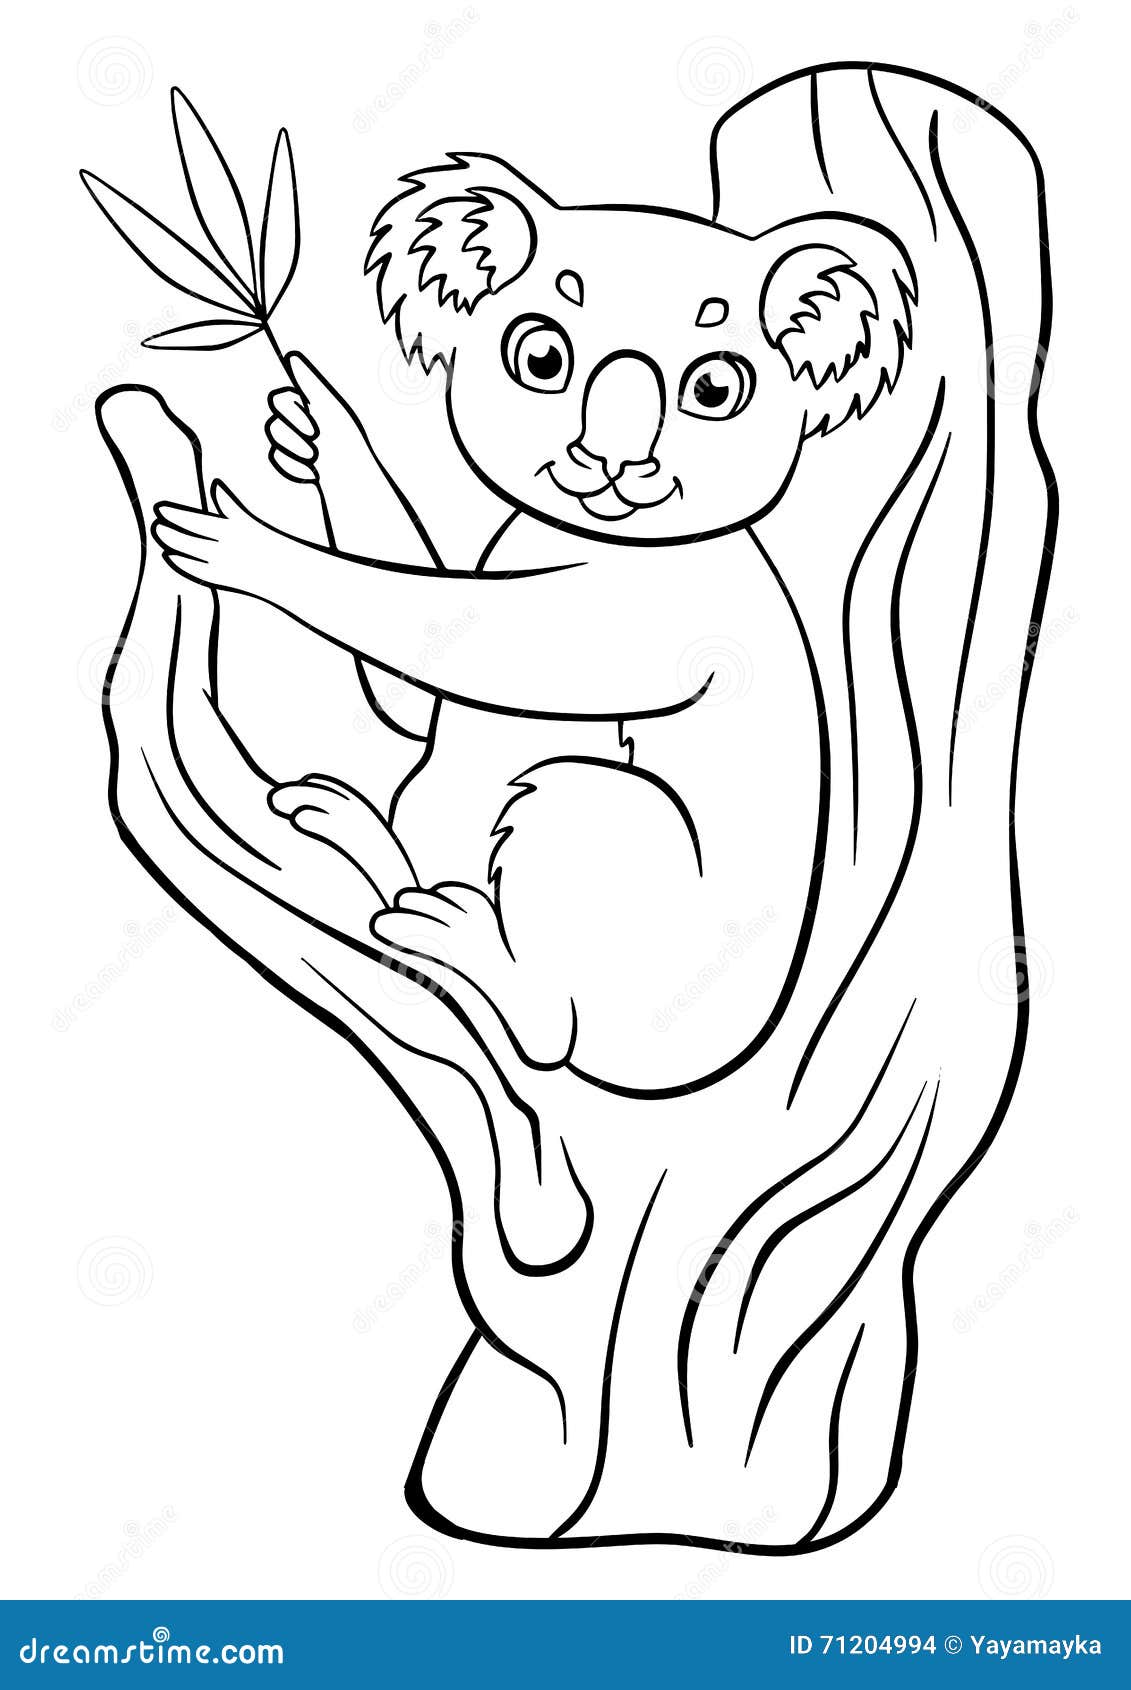 Coloring Pages. Animals. Little Cute Koala. Stock Vector ...